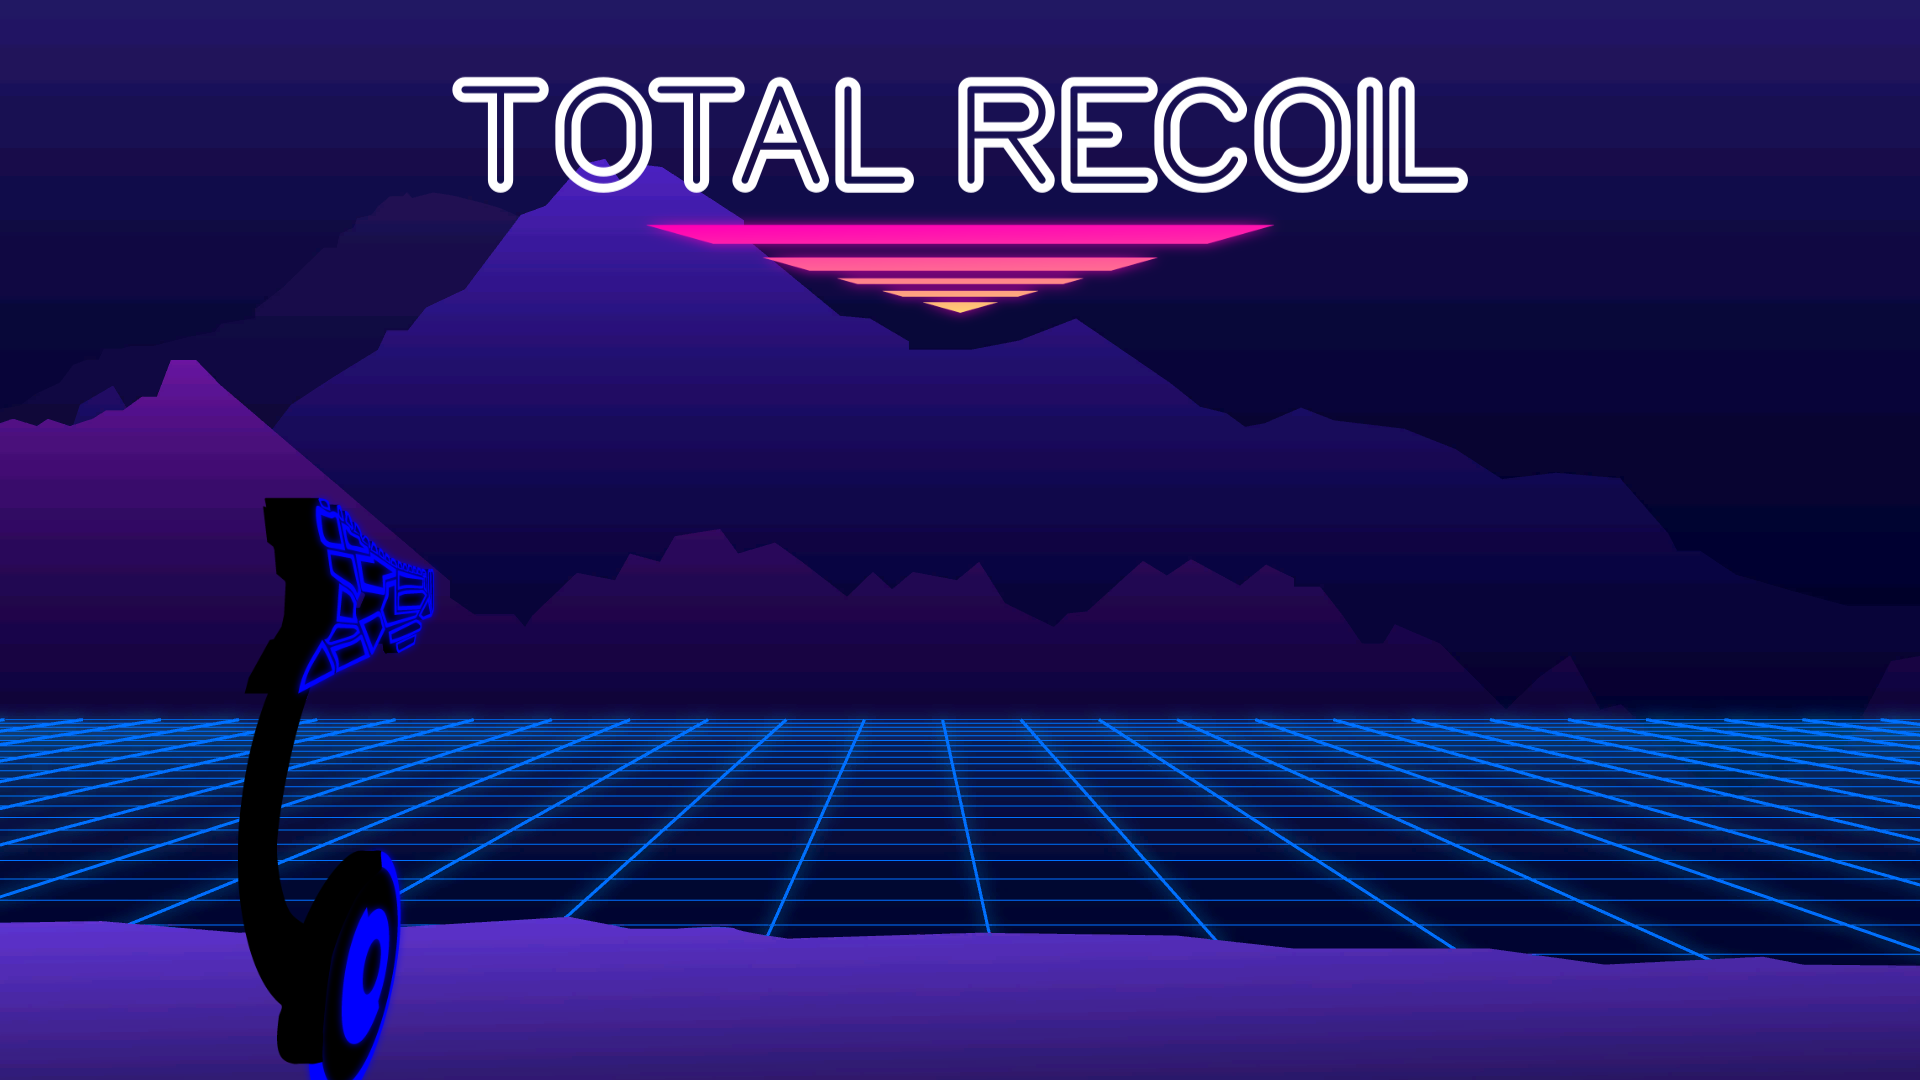 Total Recoil